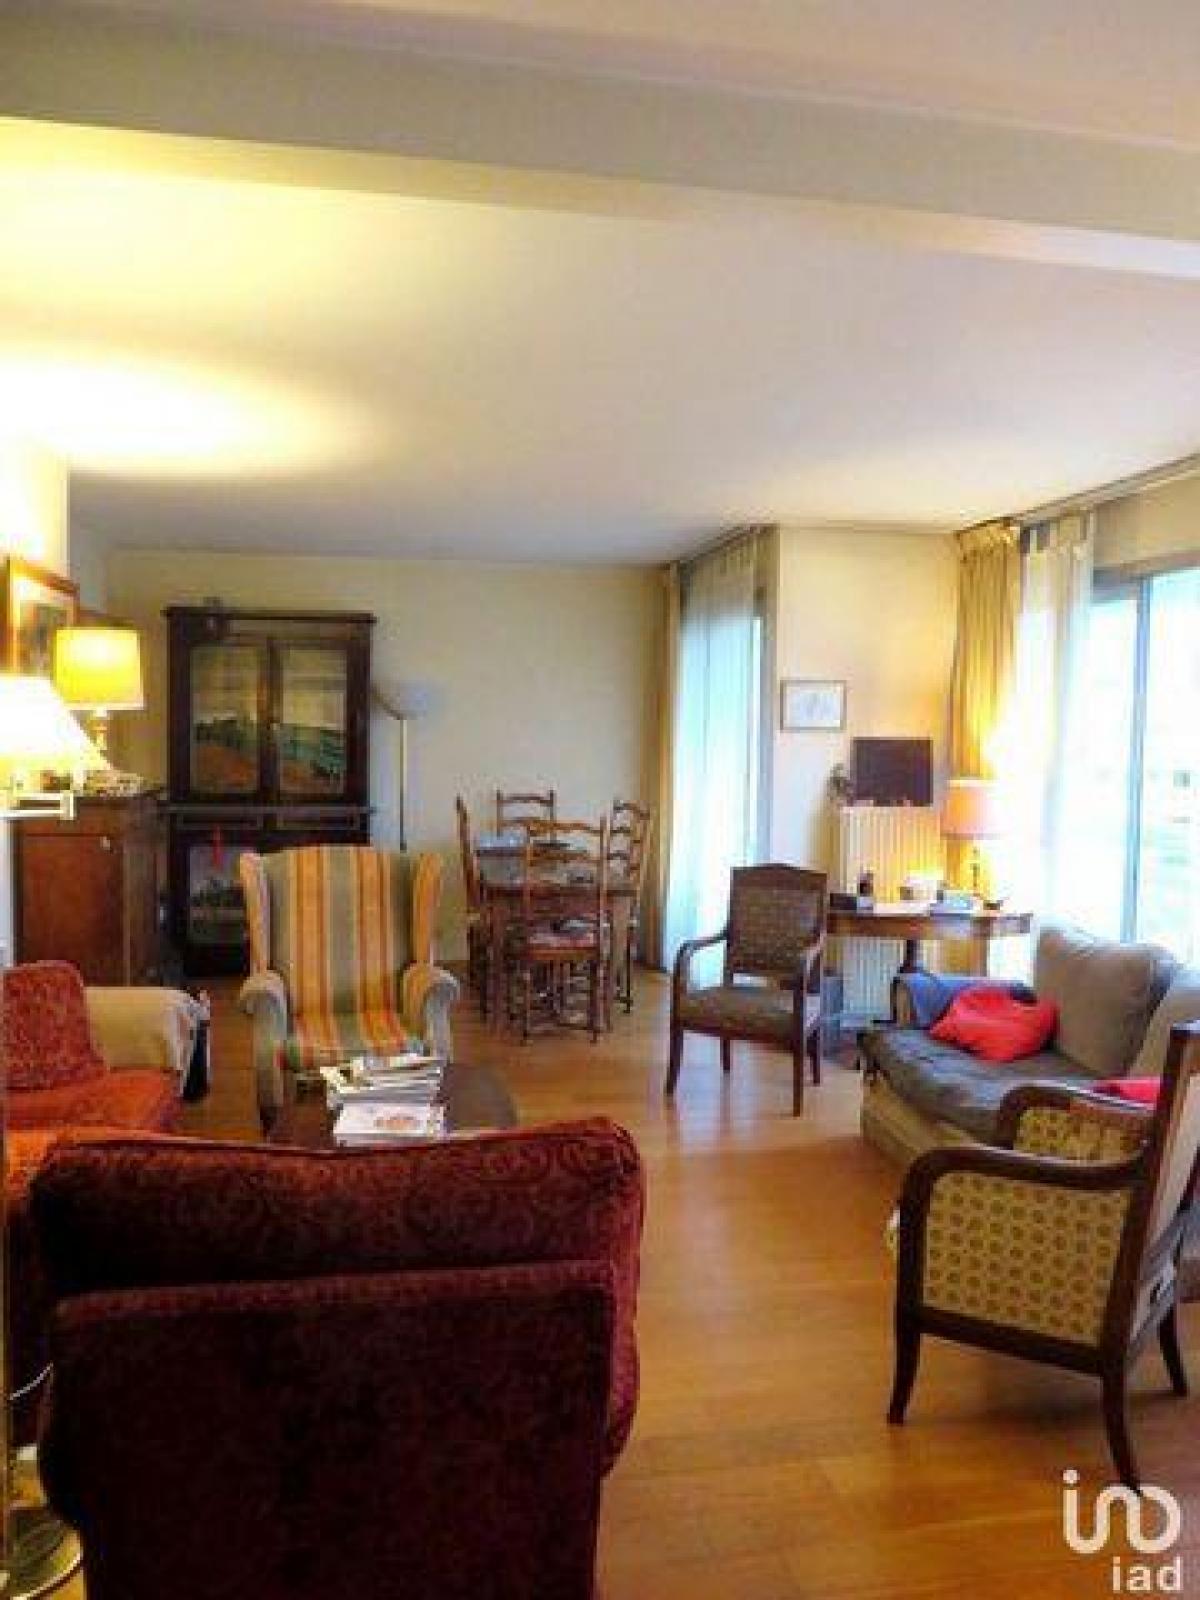 Picture of Condo For Sale in Bailly, Bourgogne, France